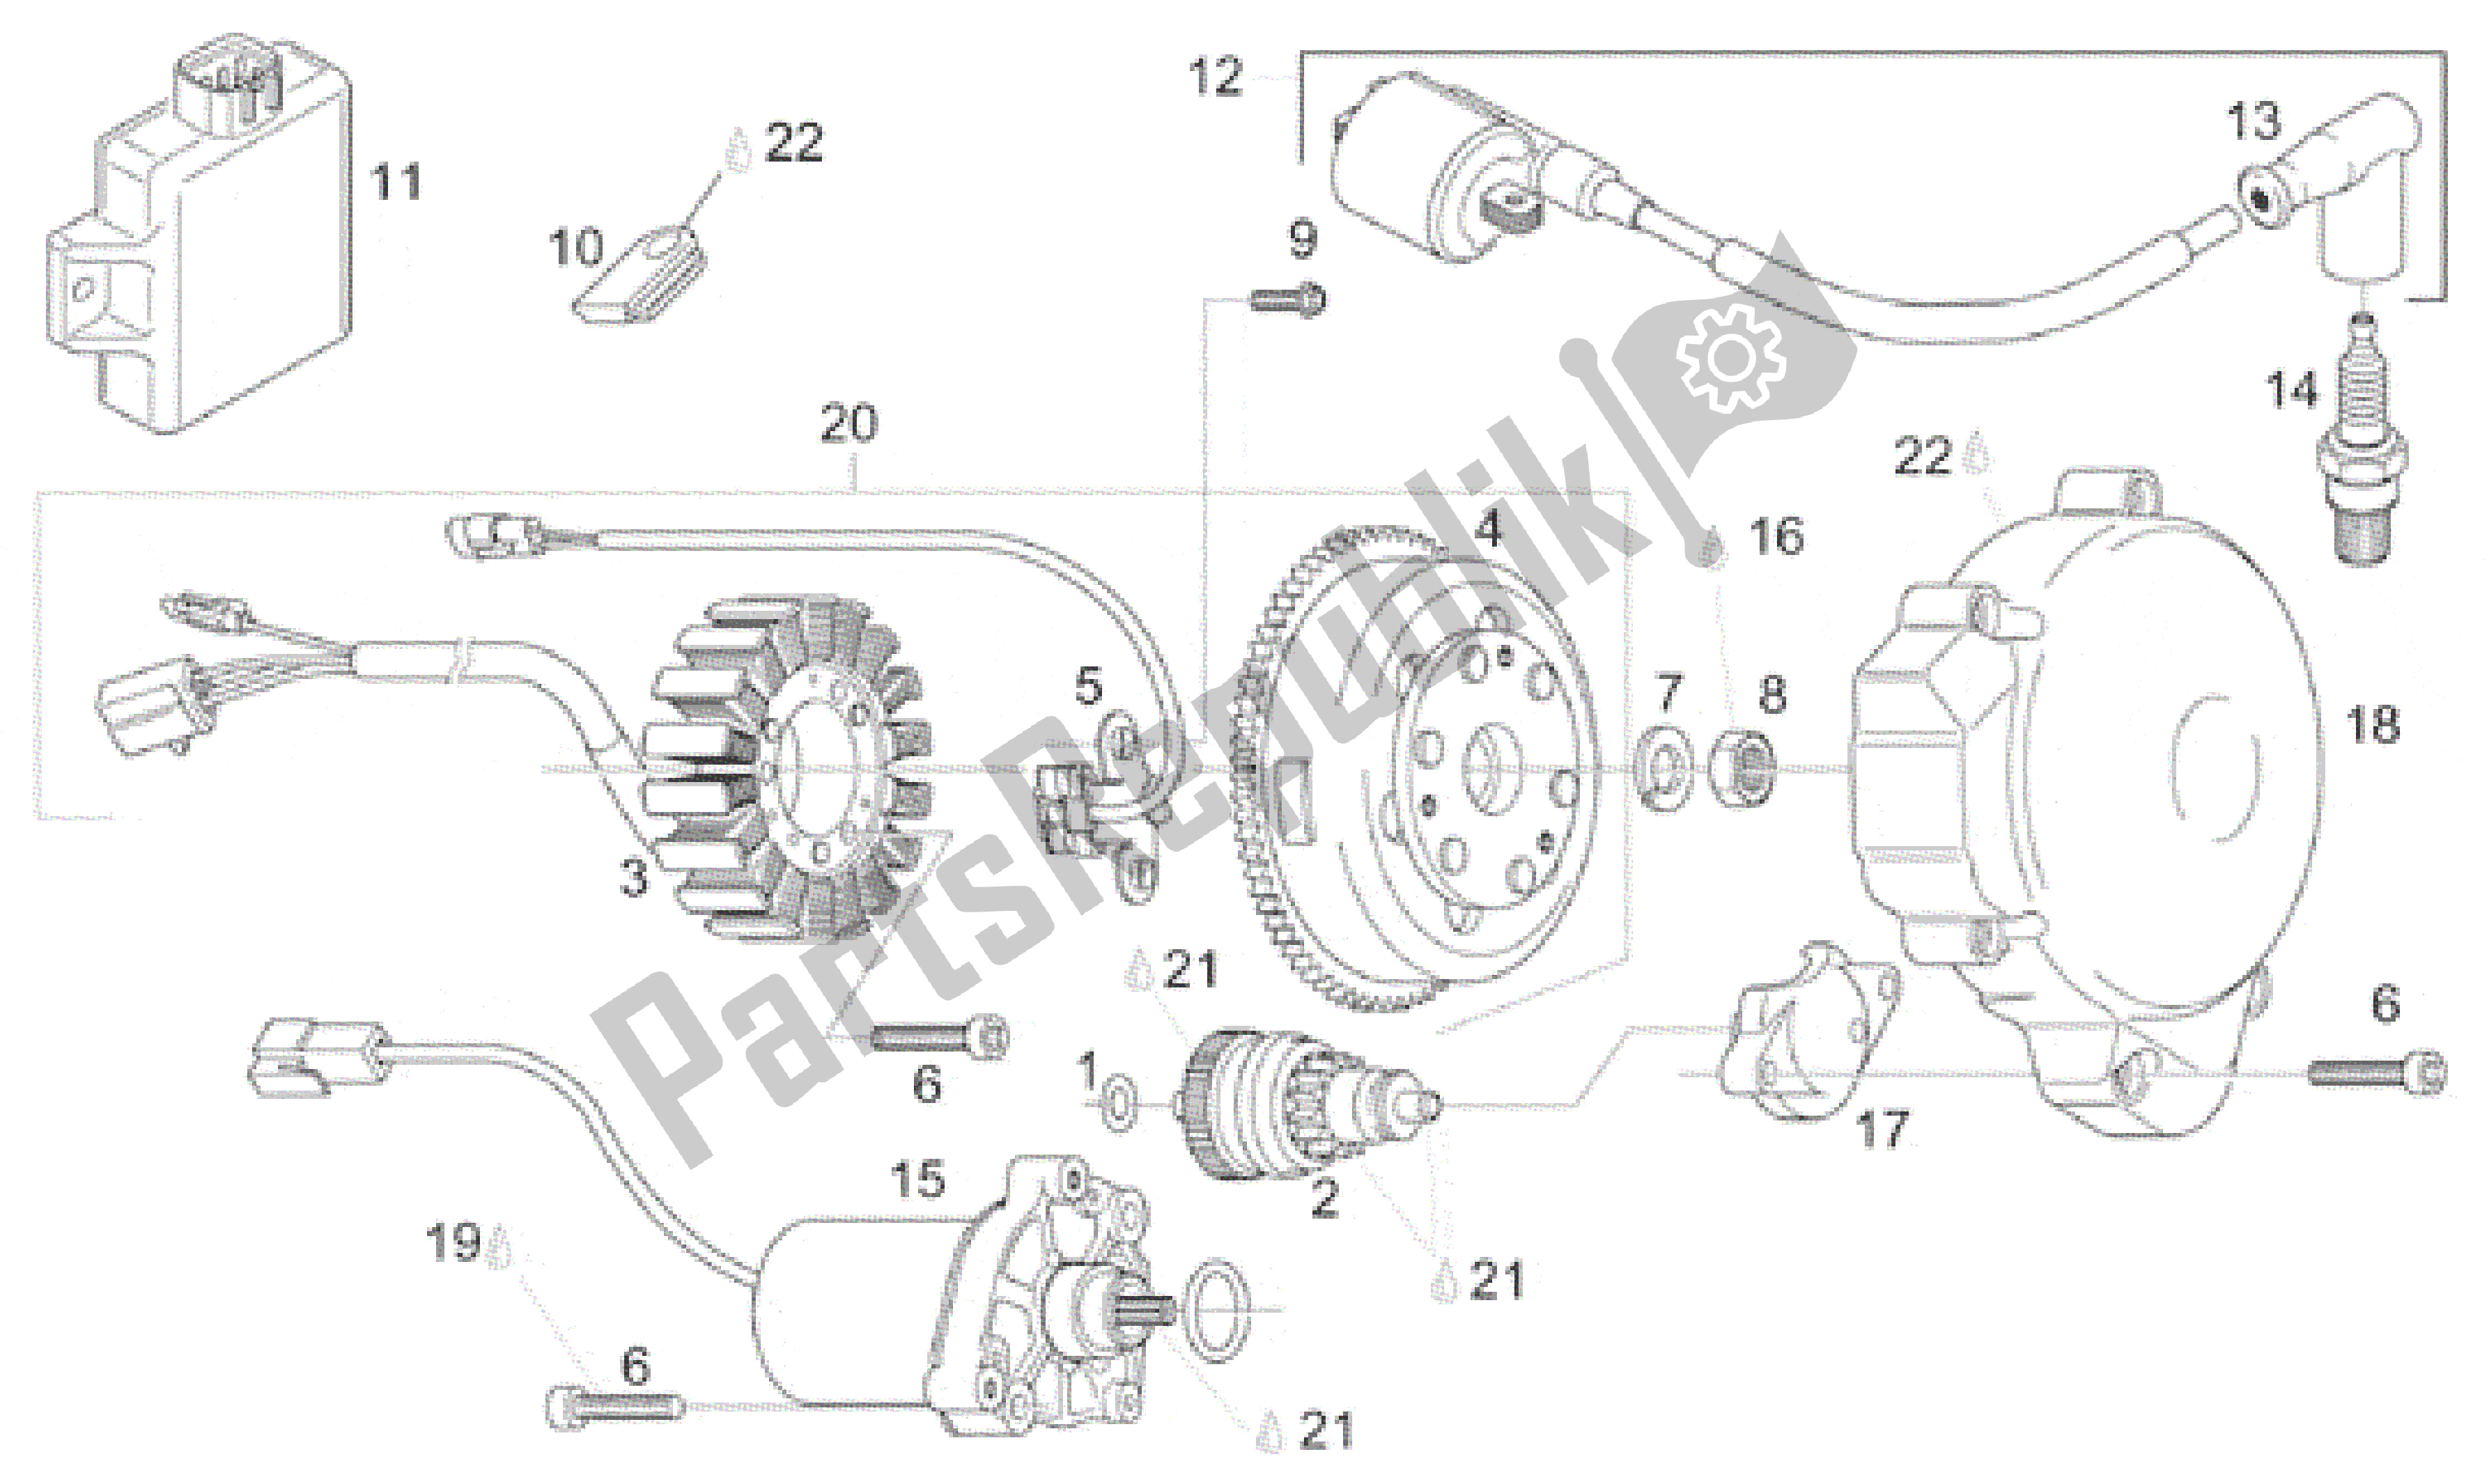 All parts for the Ignition Unit of the Aprilia Classic 125 1995 - 1999